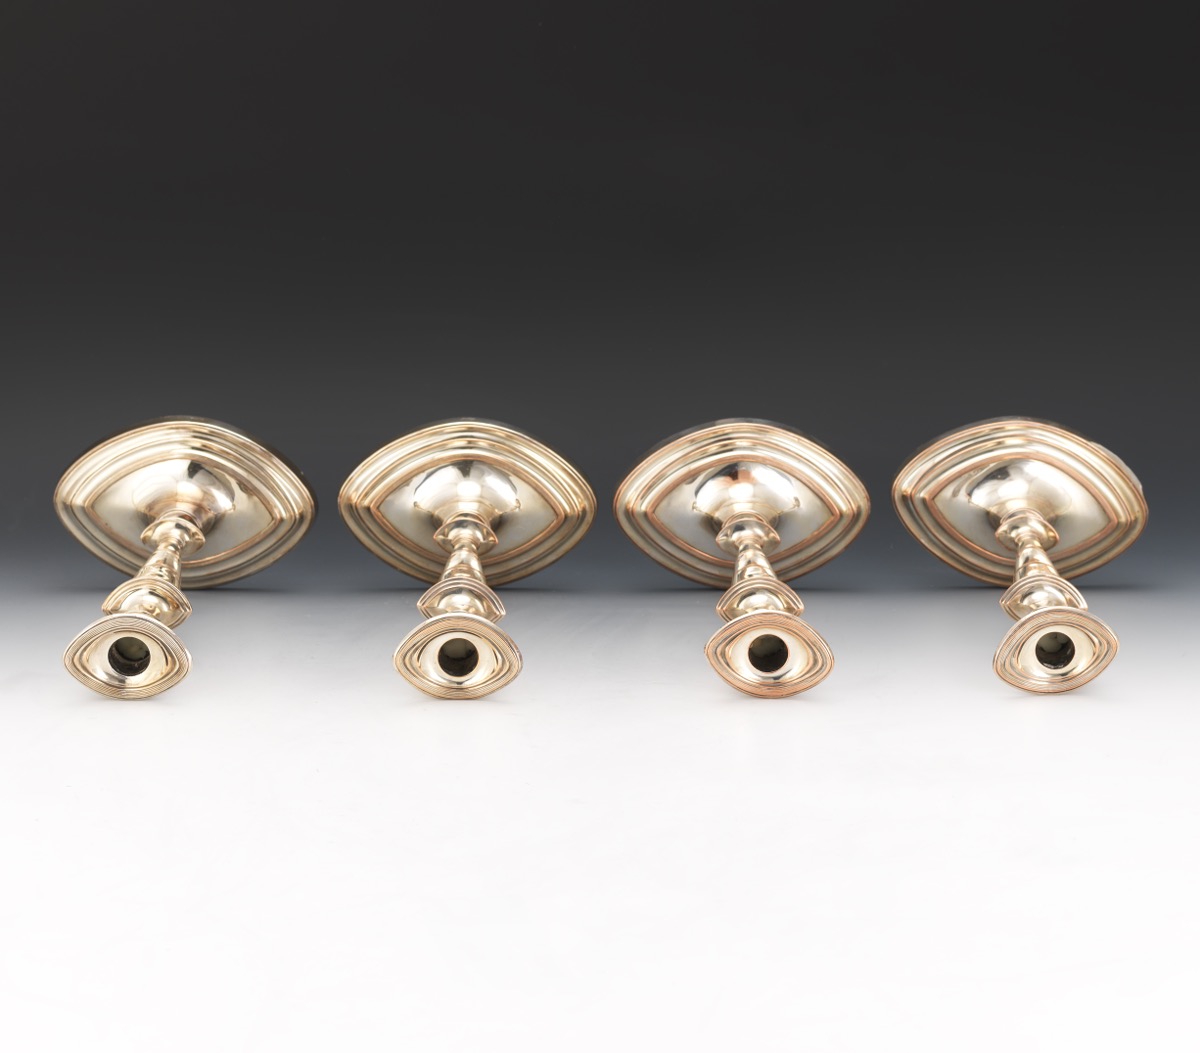 Four Silver Plated Mixed Metals Candleholders, by Ellis-Barker Silver Co., Birmingham, England - Image 5 of 6